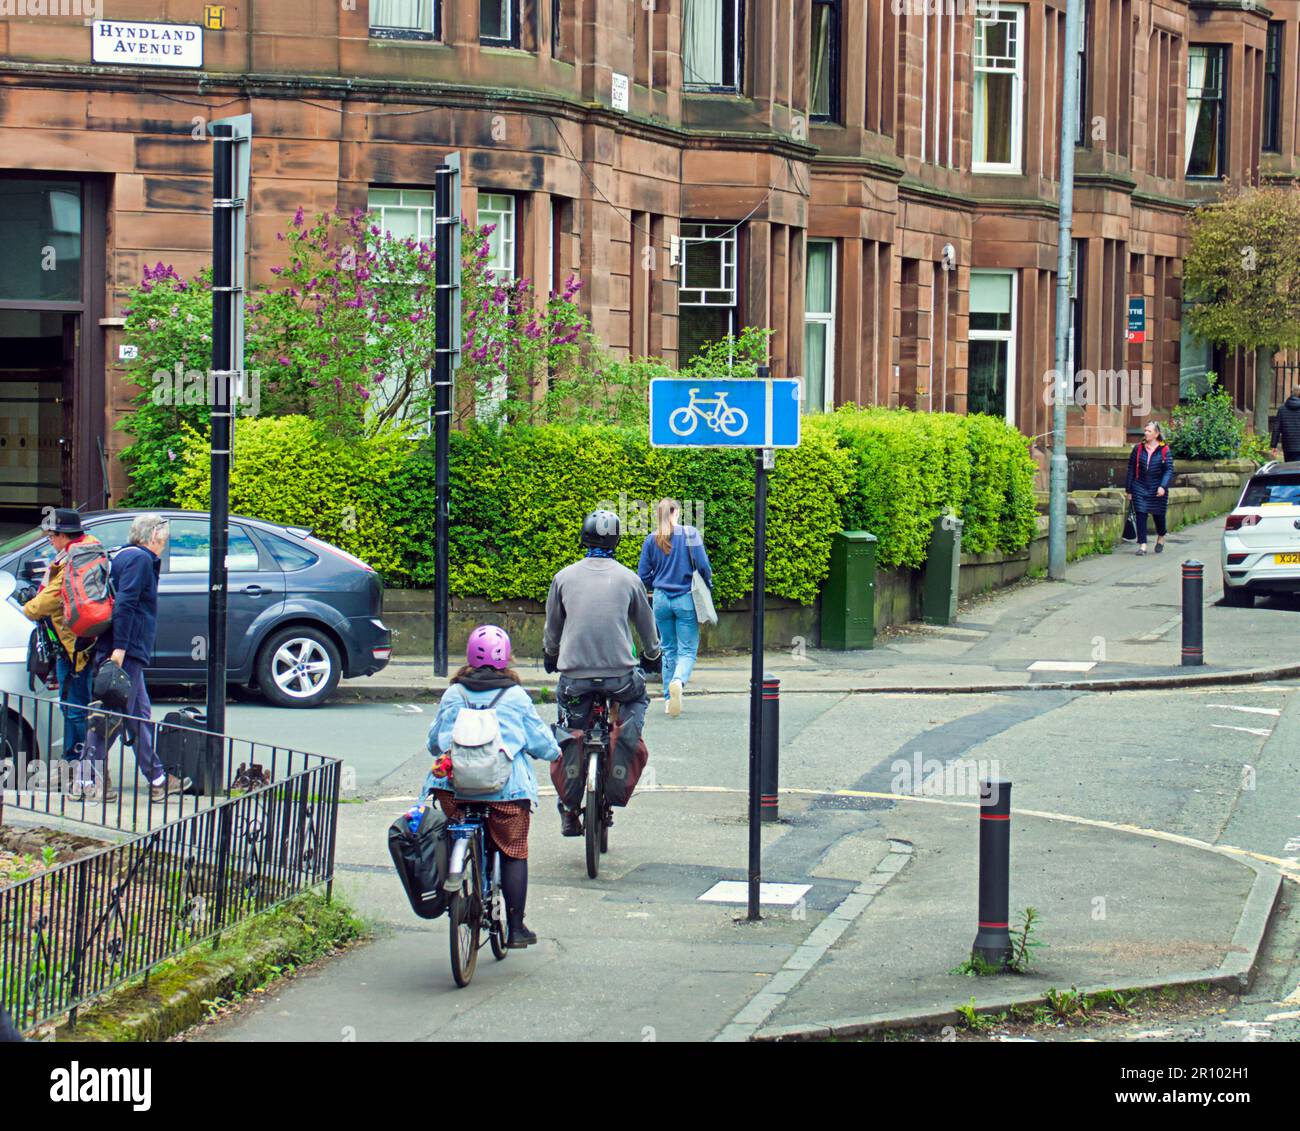 bicycles on the pavement om hyndland road Stock Photo